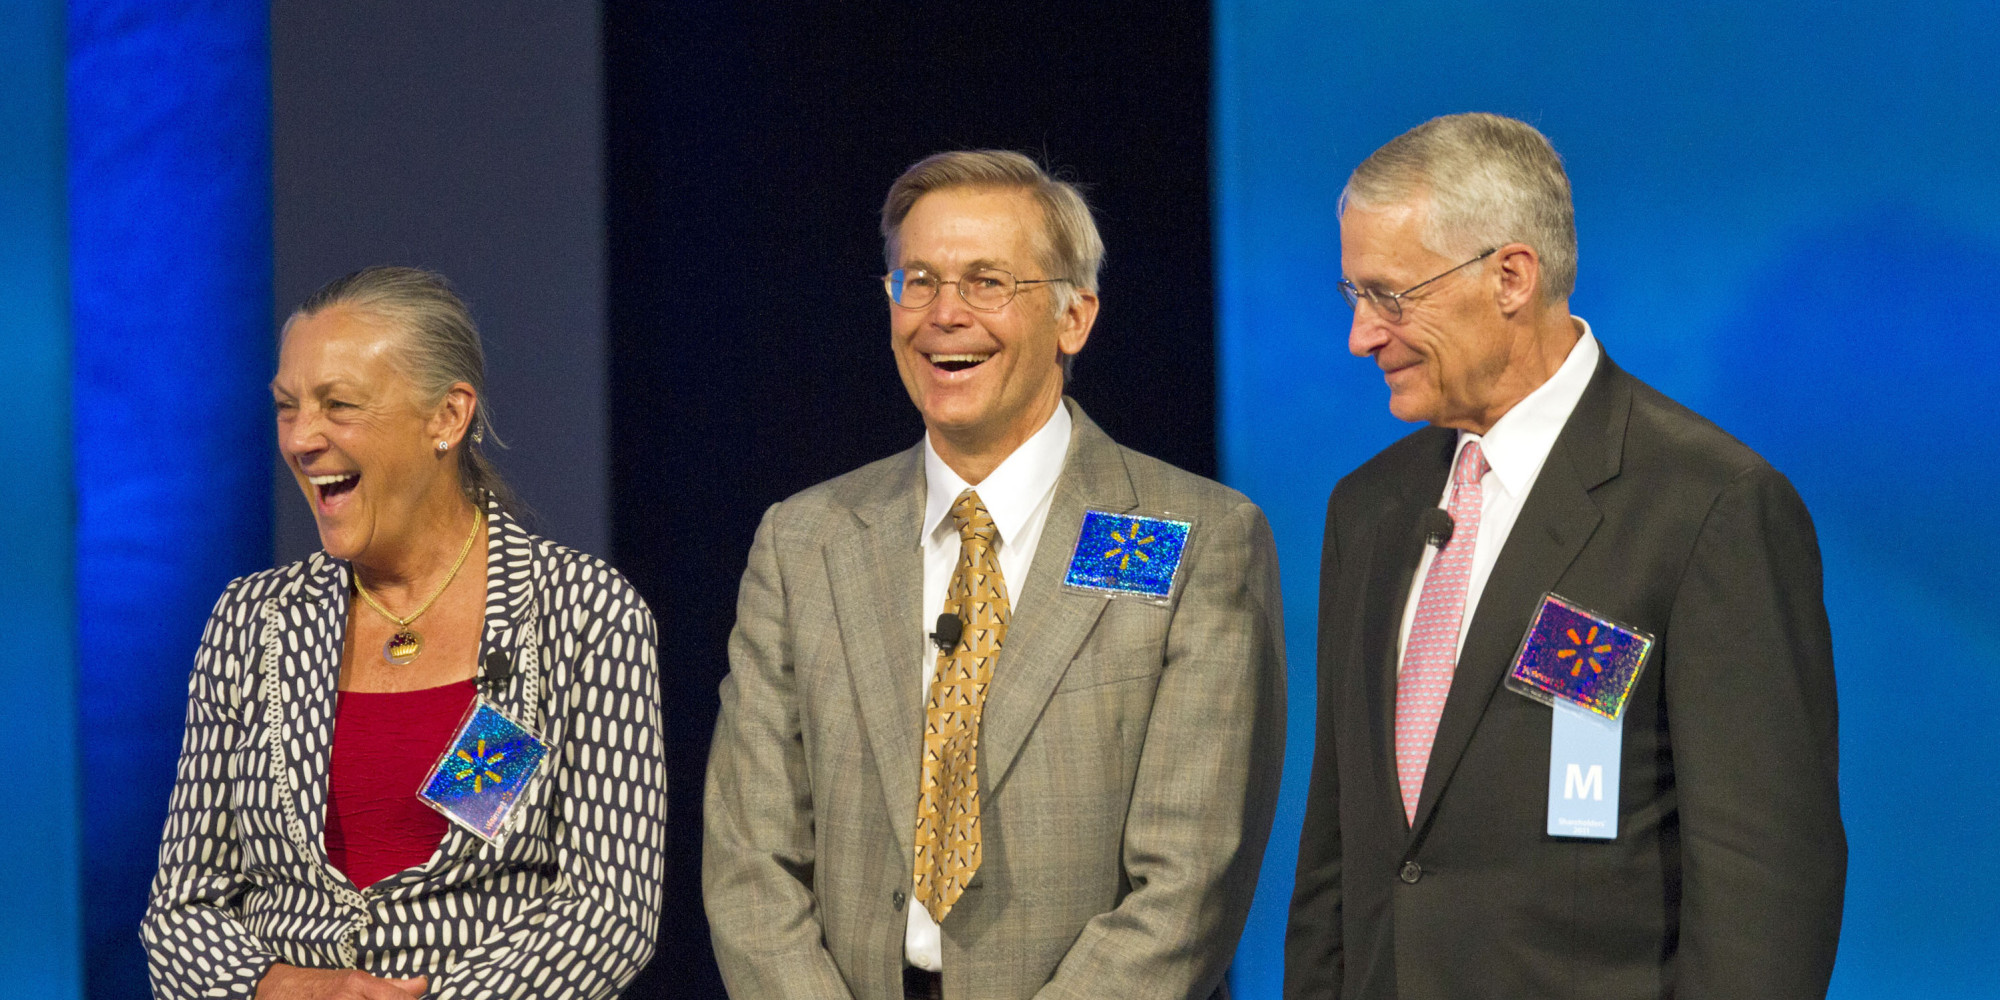 Alice Walton, Jim Walton and Wal-Mart Chairman Rob Walton, the children of the late Wal-Mart Stores Inc. founder Sam Walton, appear on stage during the company's annual shareholder meeting in Fayetteville, Arkansas, U.S., on Friday, June 3, 2011.